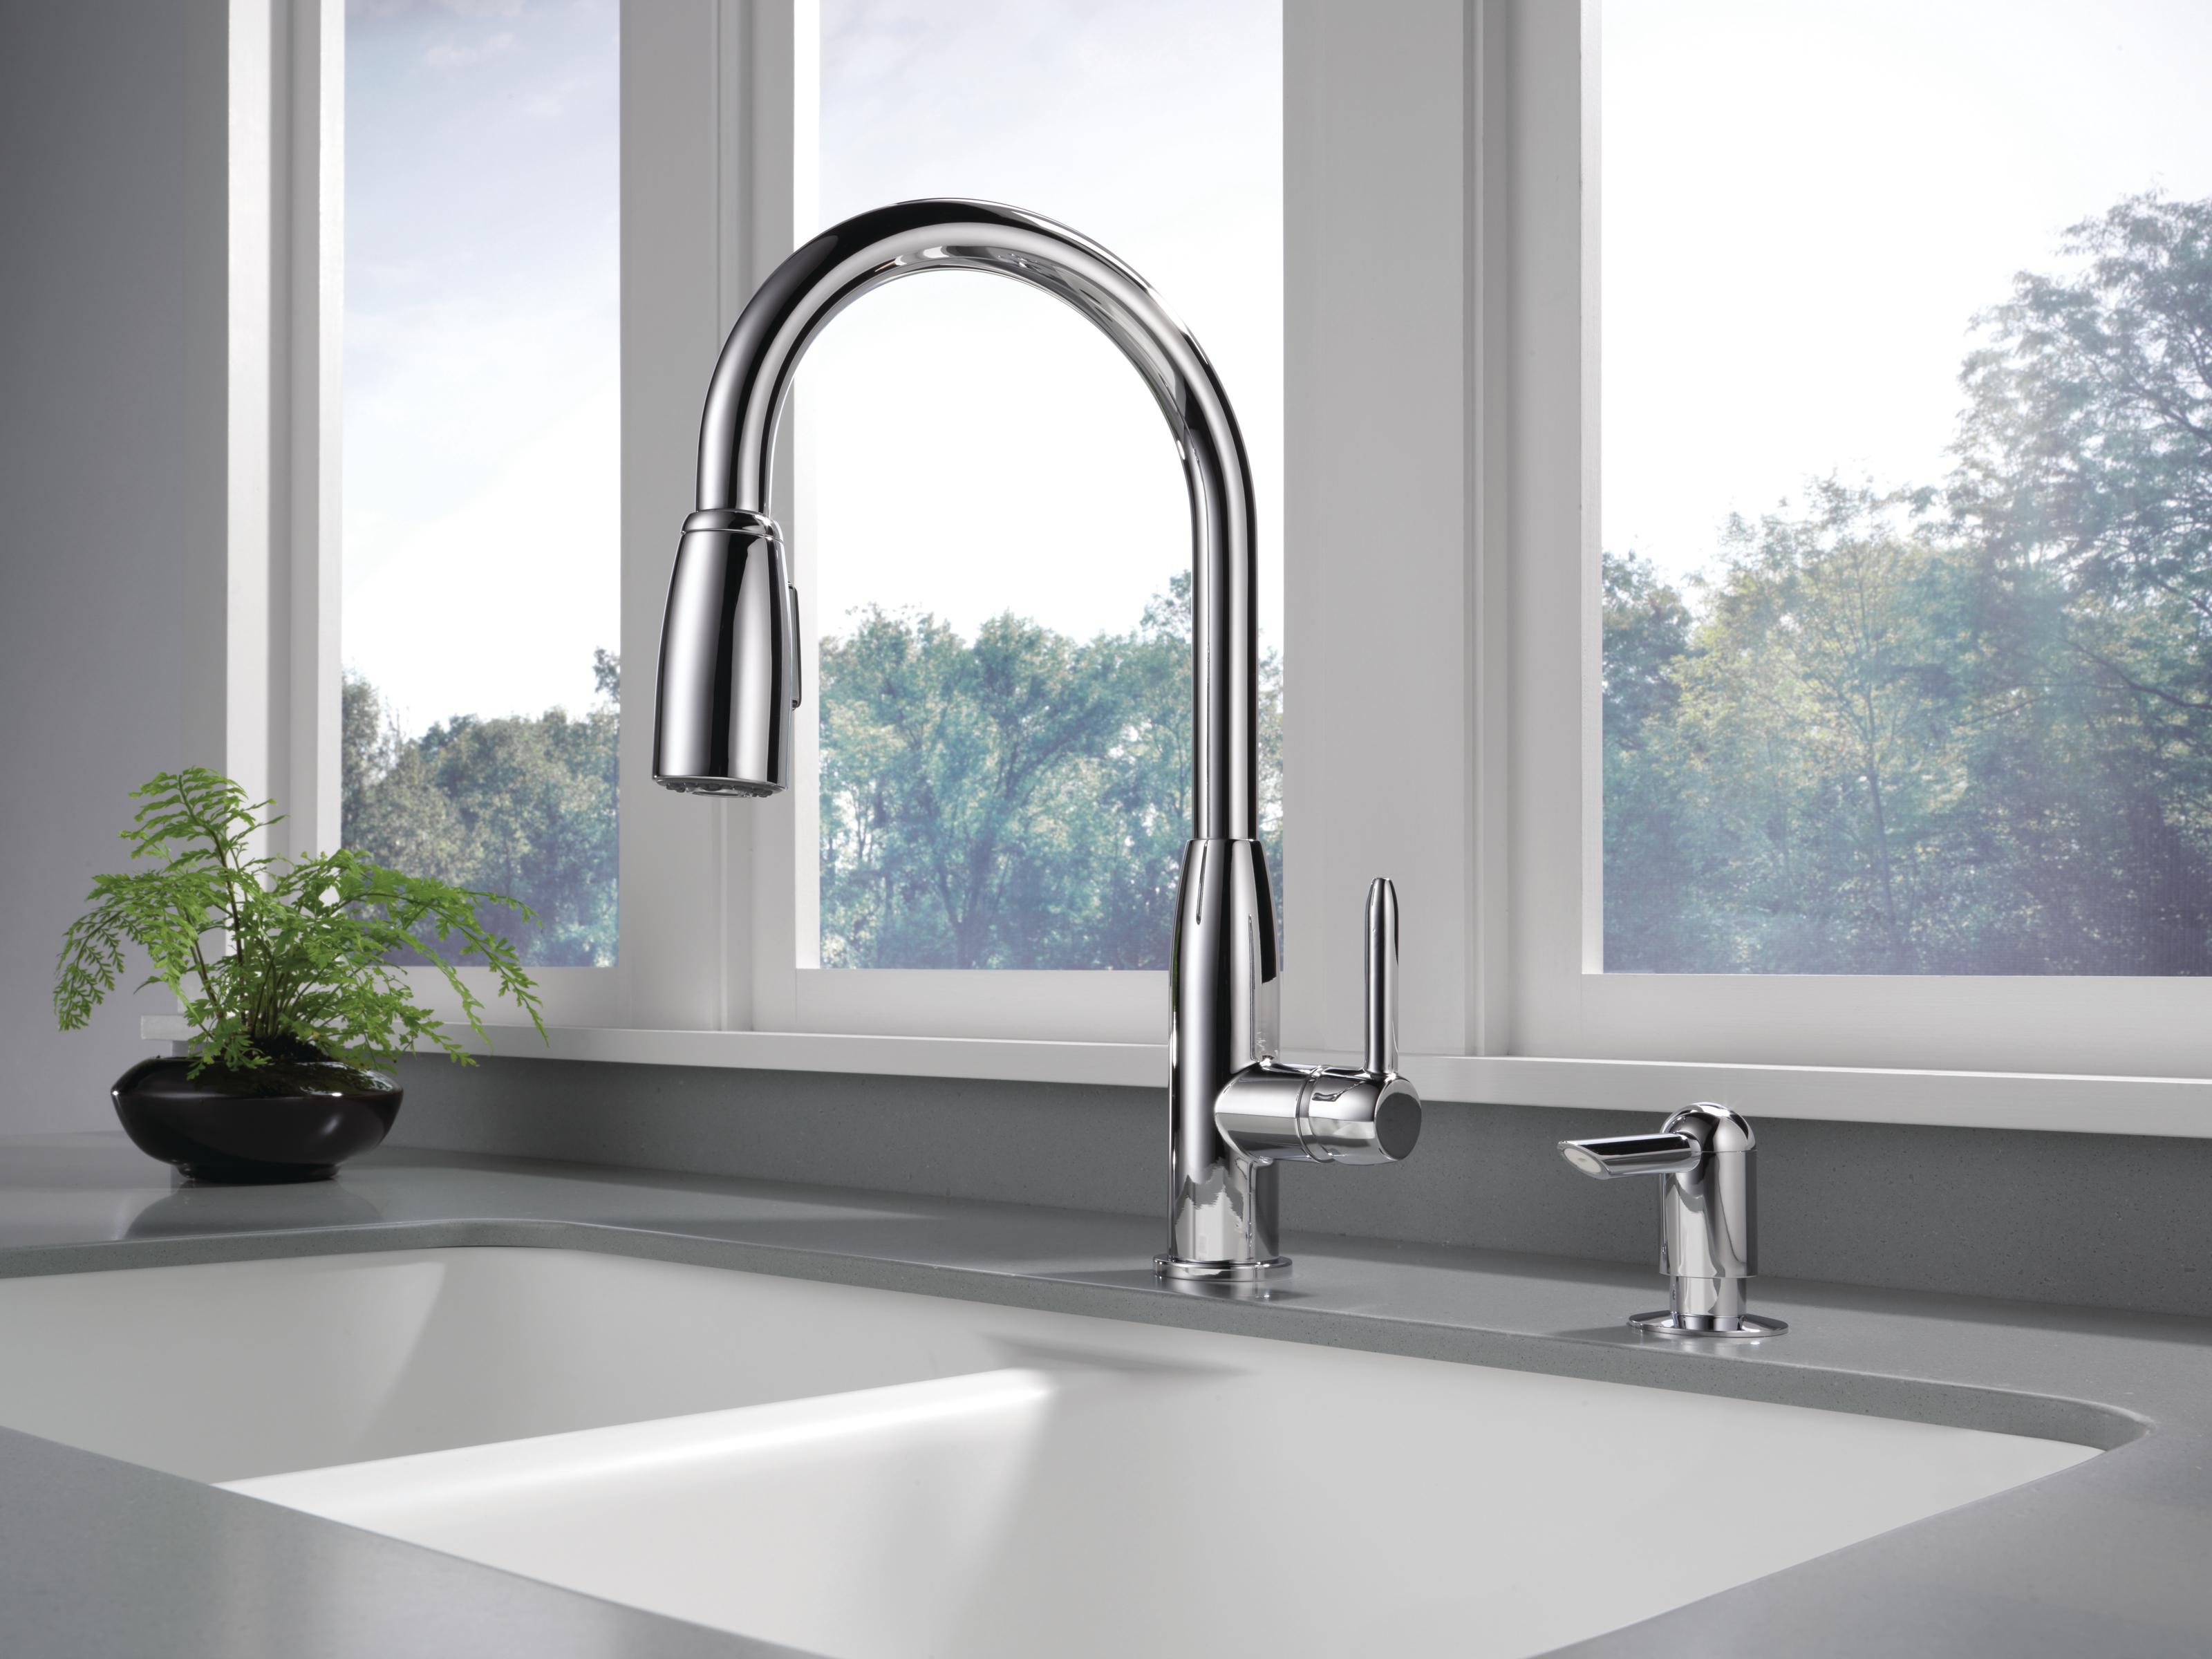 Peerless Core Kitchen Single Handle Pull-Down Faucet in Chrome P88103LF-SD-L - image 6 of 11